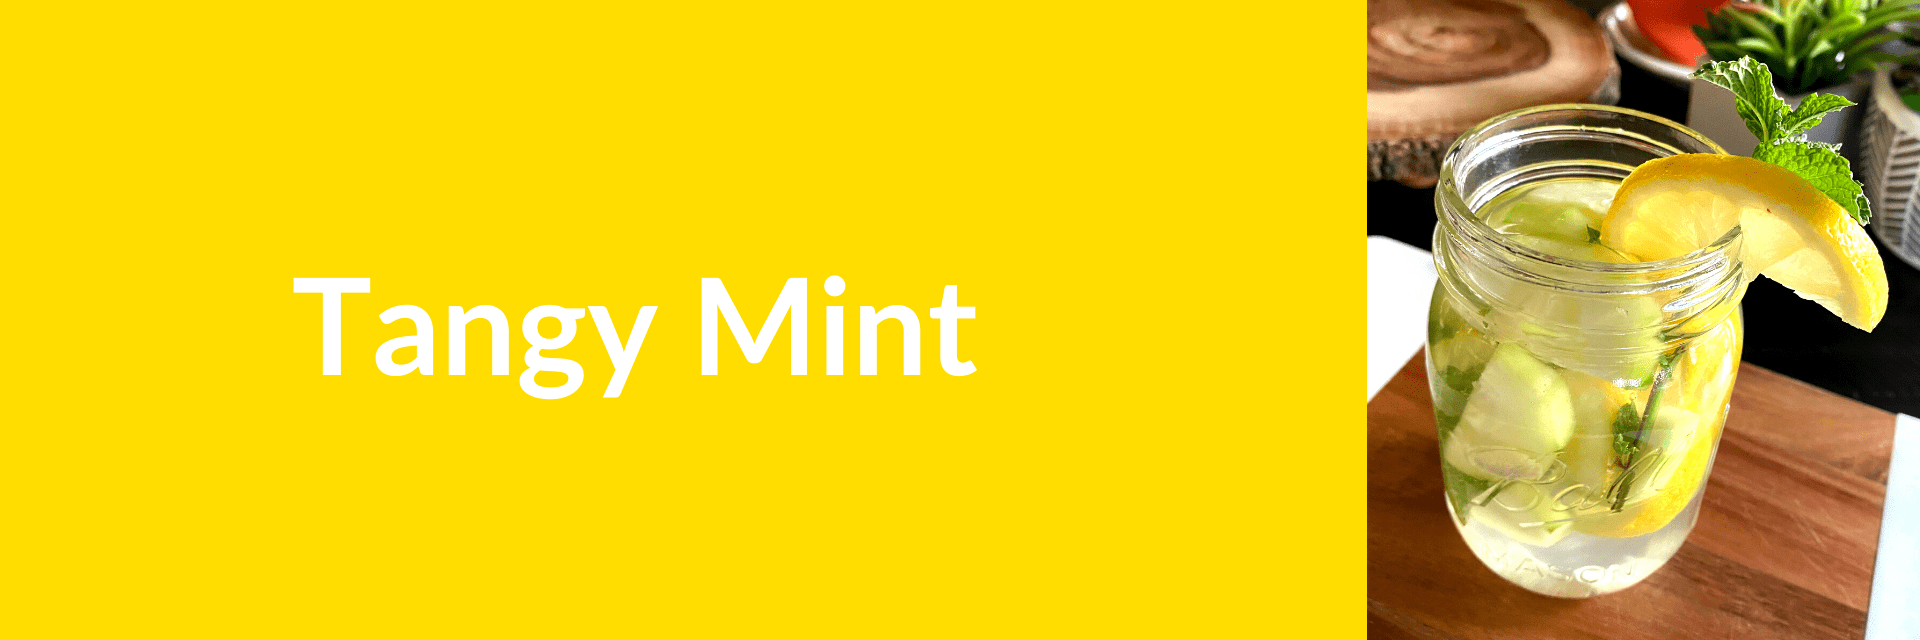 tangy mint banner